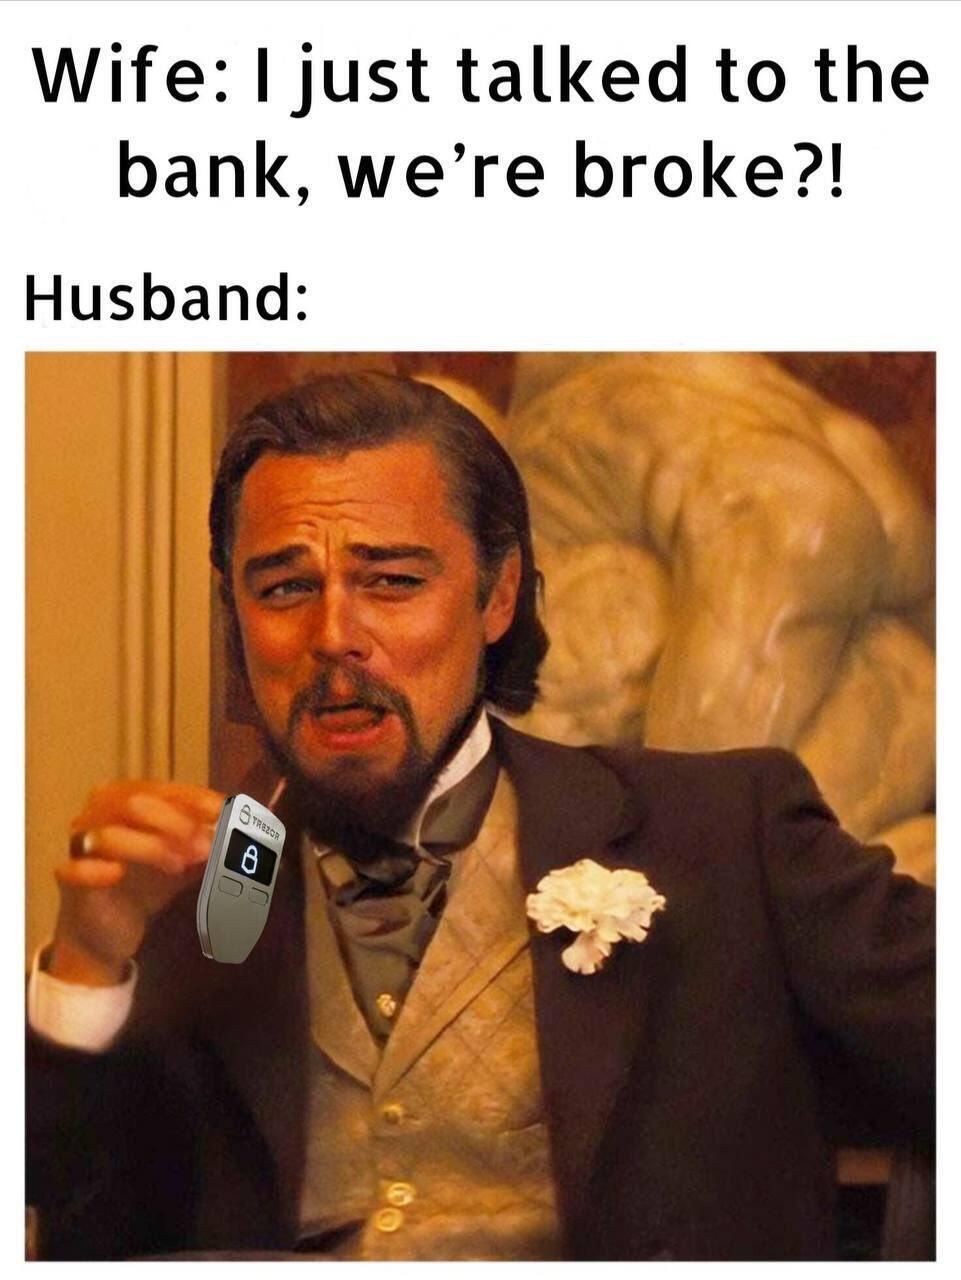 Wife: I just talked to the
bank, we're broke?!
Husband:
TREZOR
8